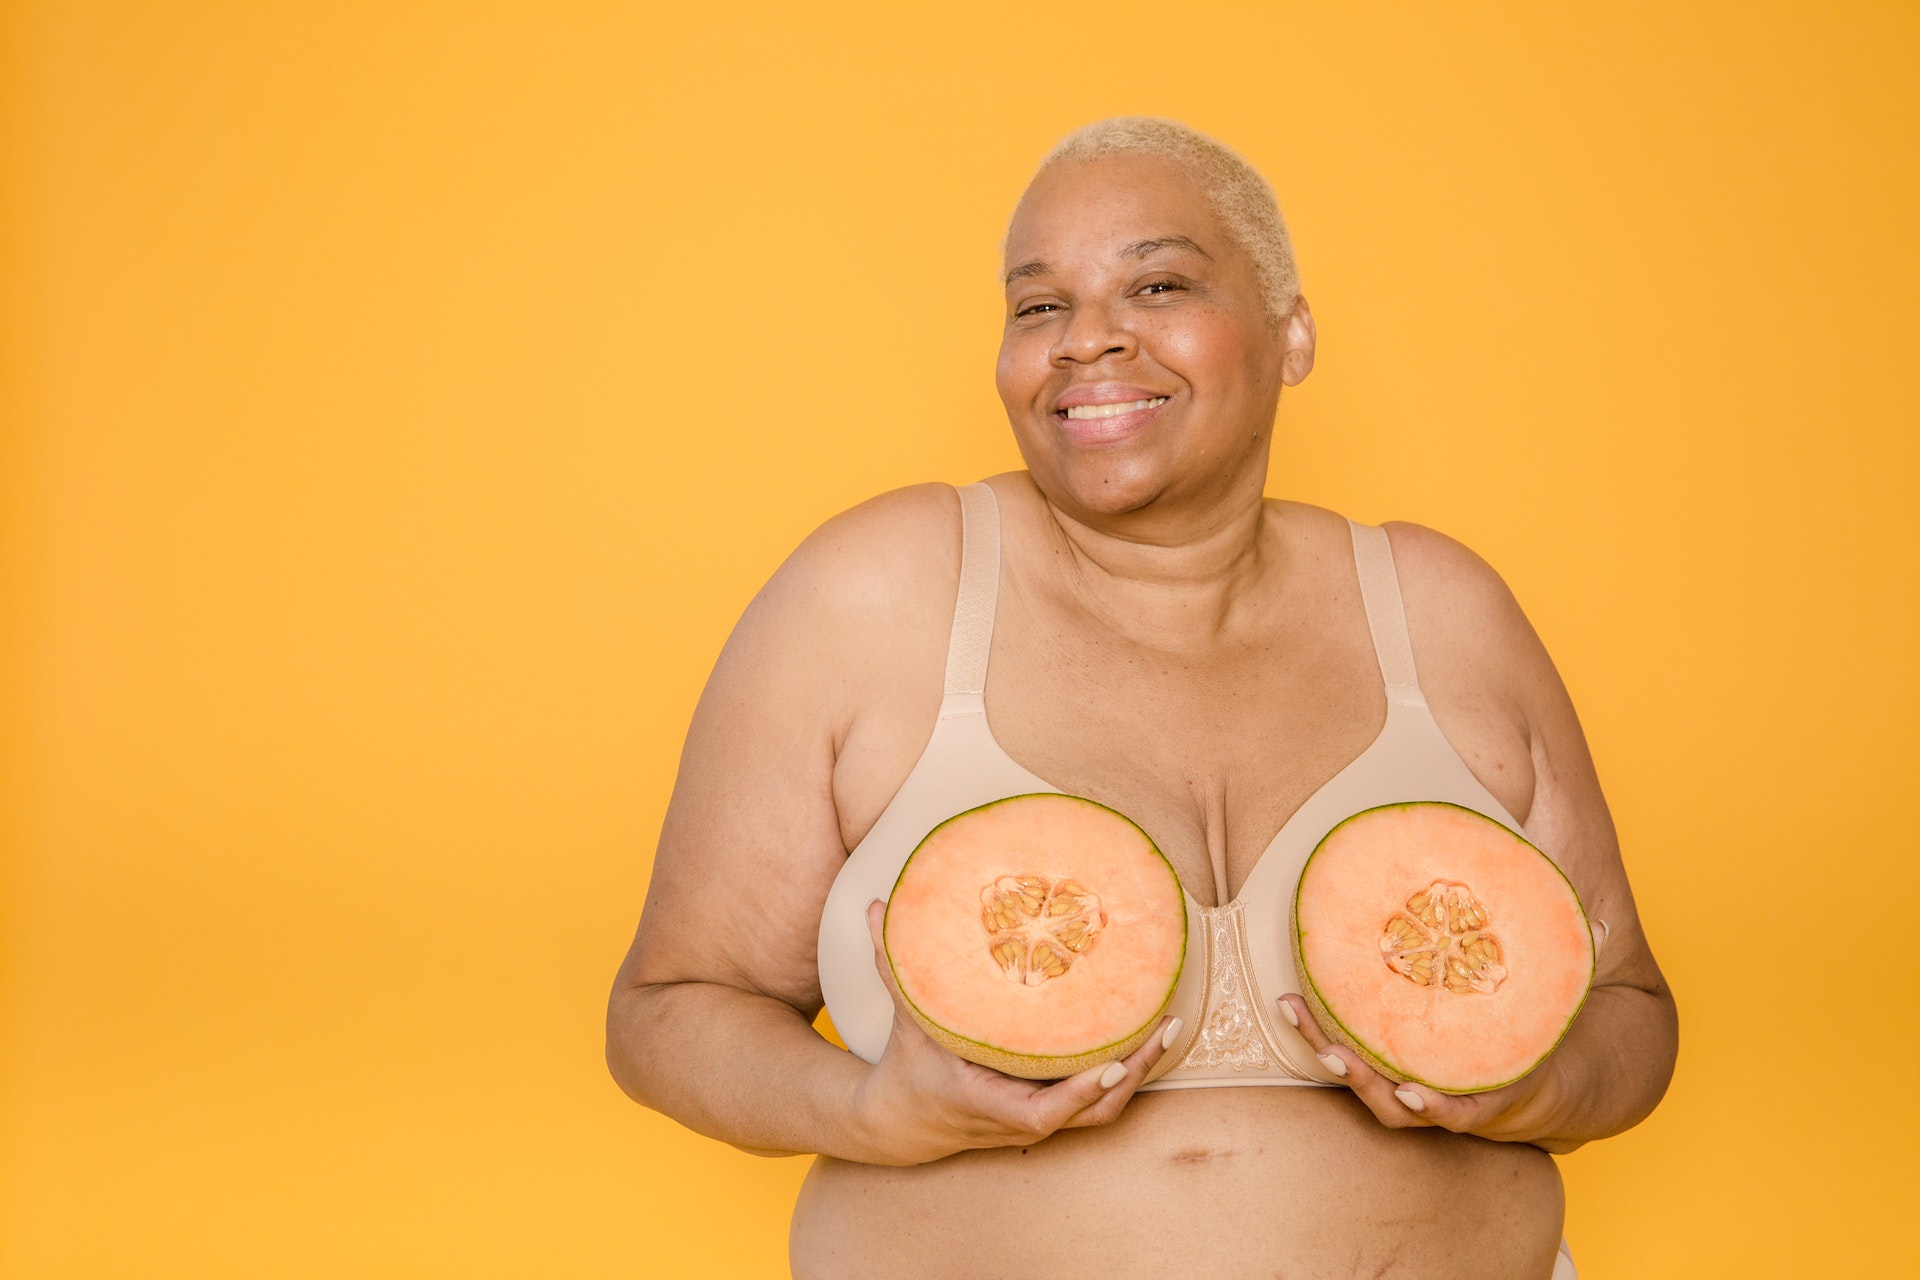 I had a breast reduction, and my breasts are still too big